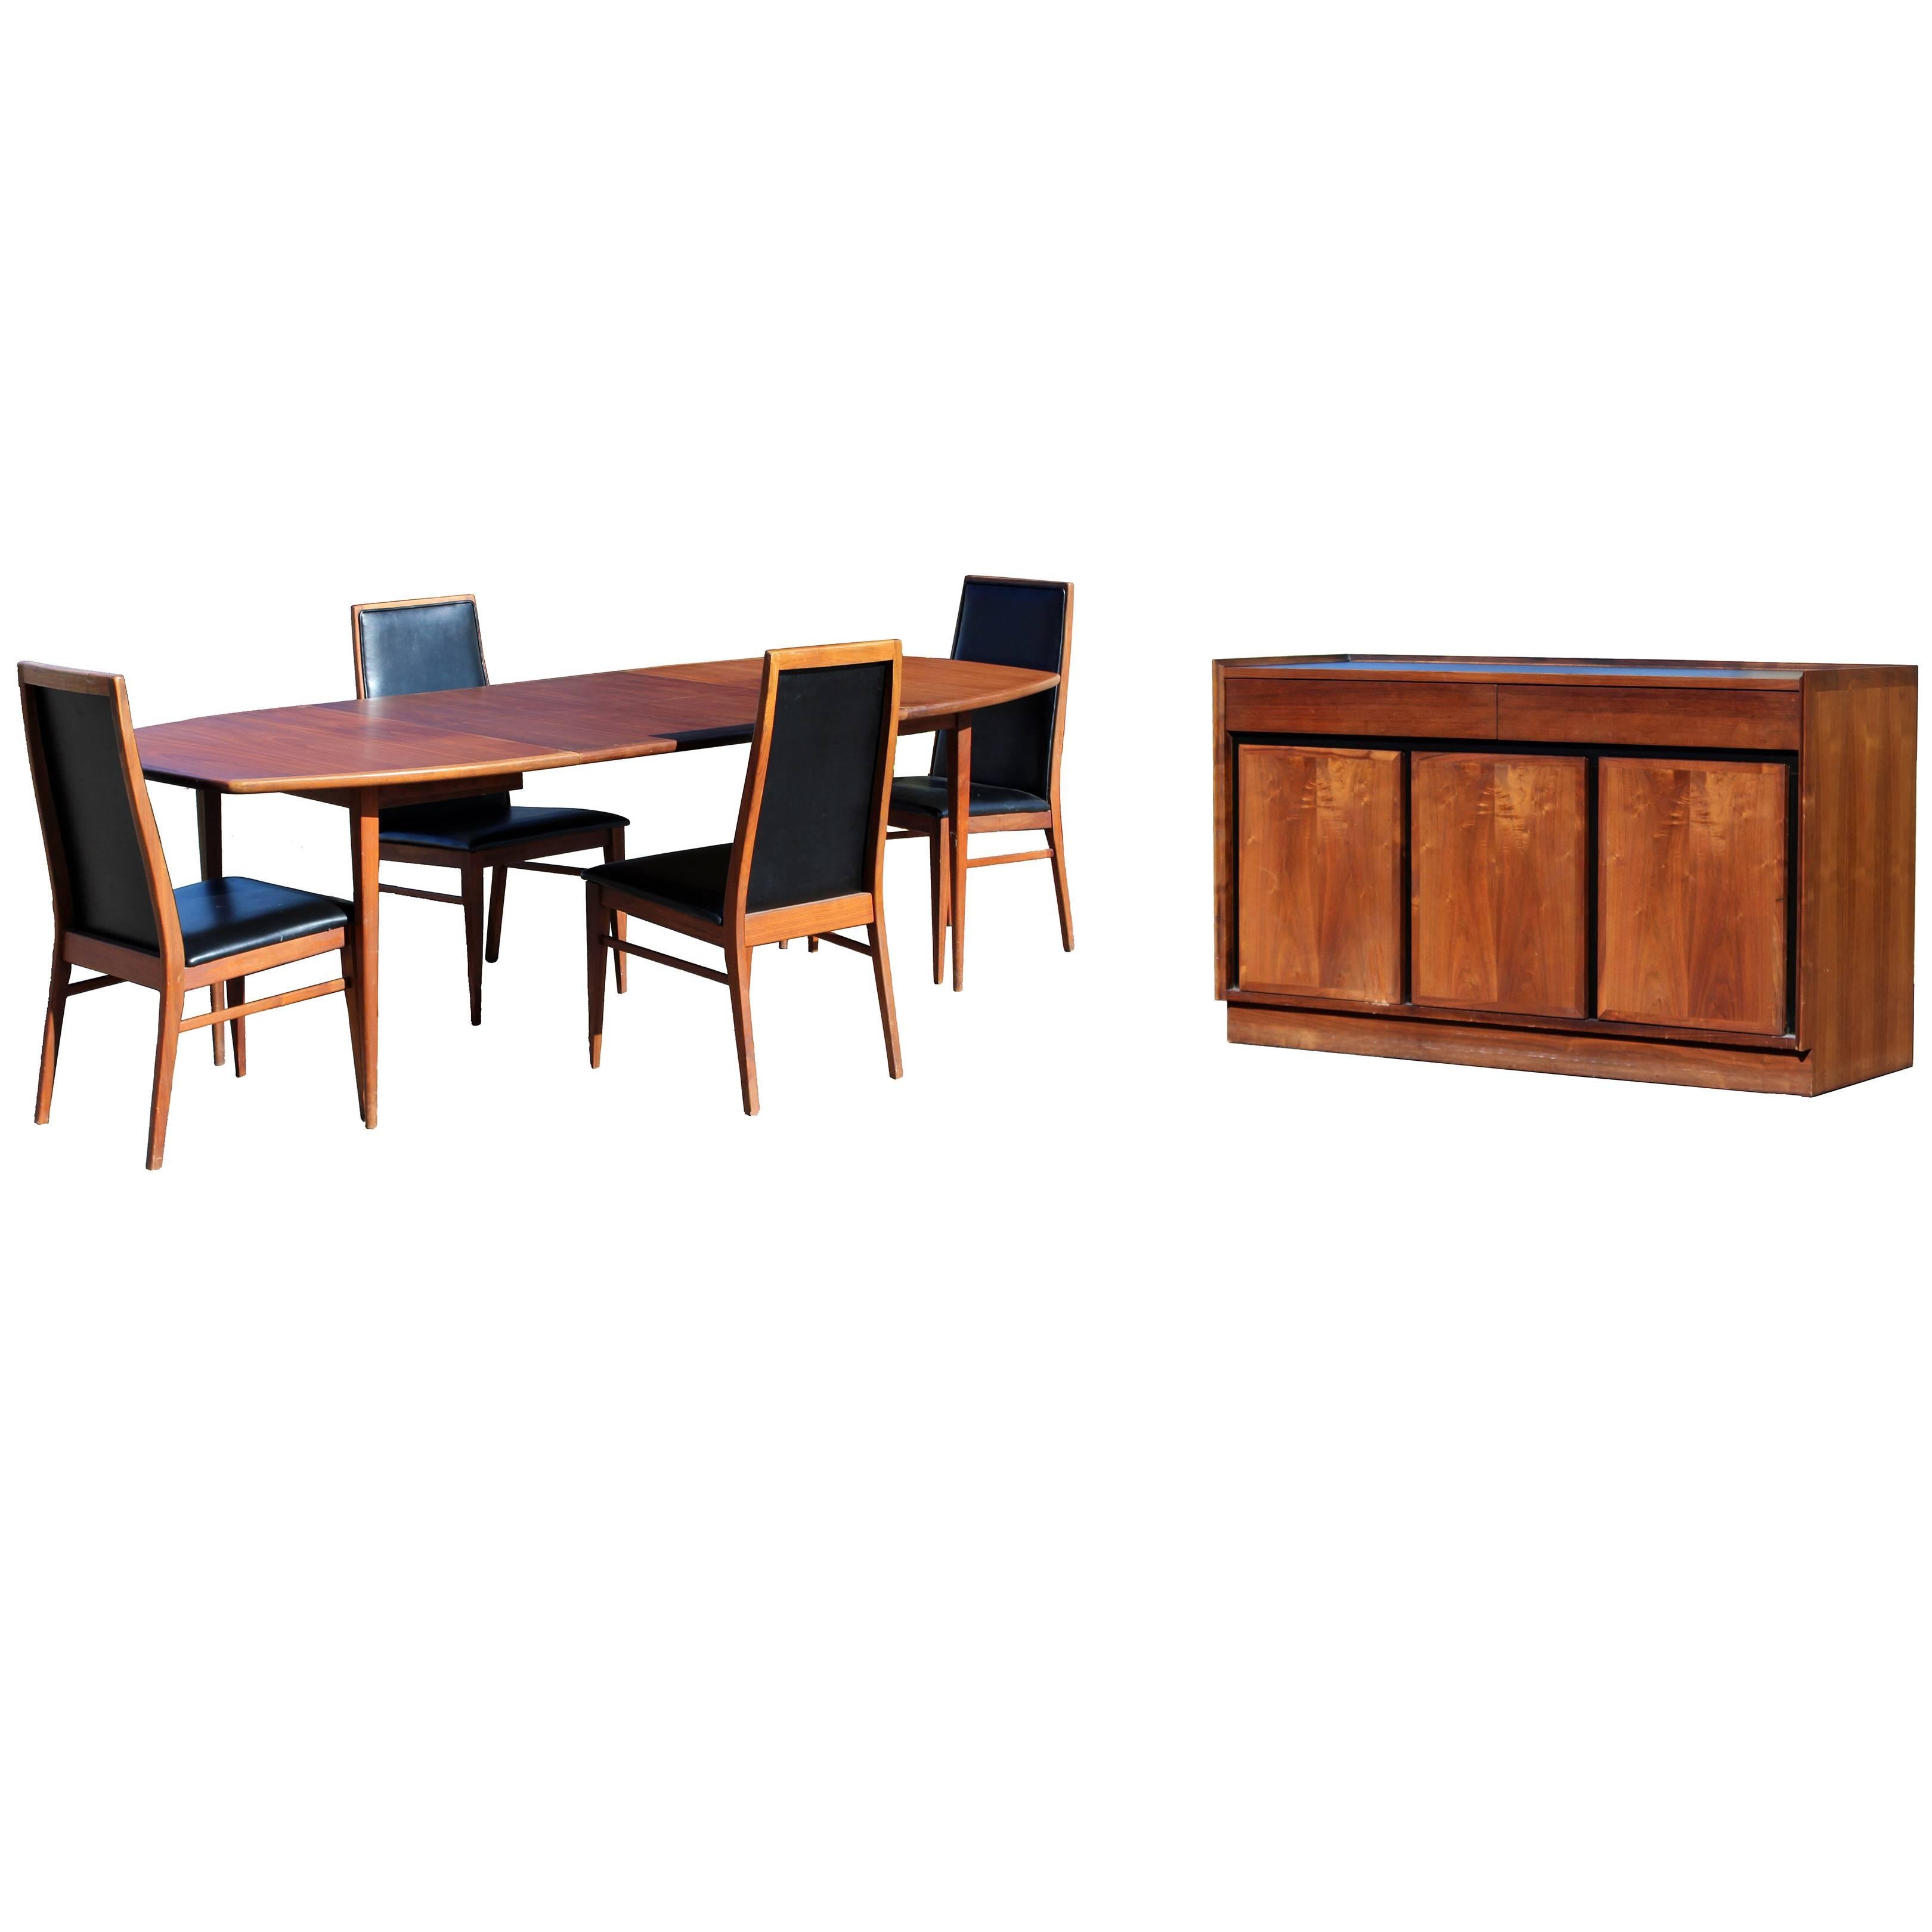 Mid-Century Modern Baughman Dillingham Dining Set of Table Four Chairs Credenza